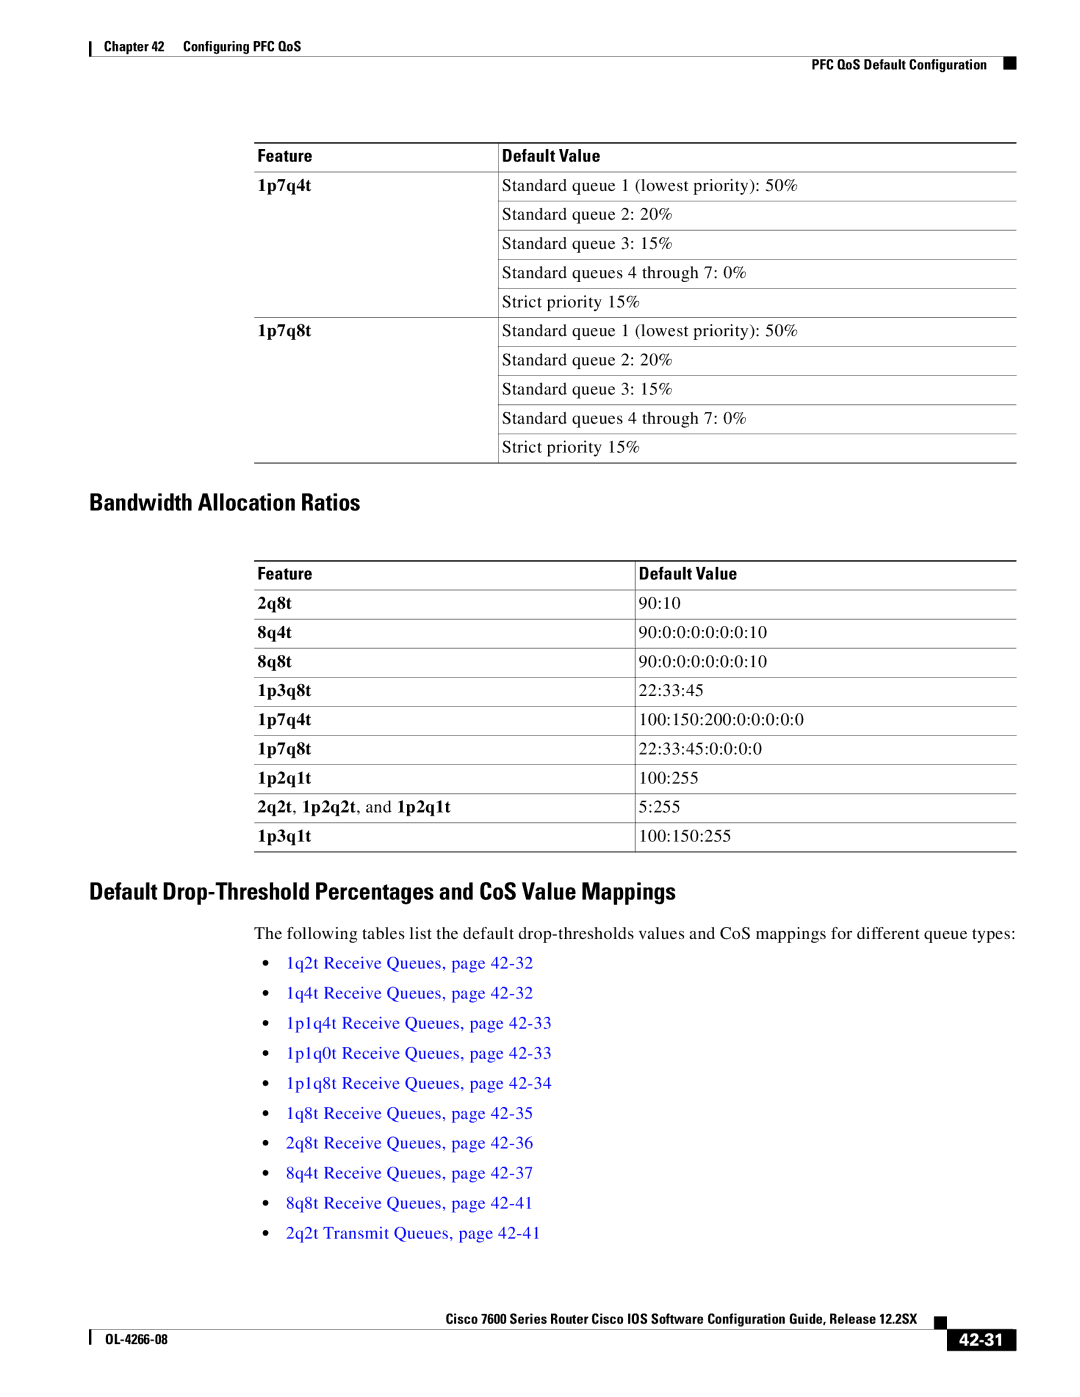 Cisco Systems OL-4266-08 Bandwidth Allocation Ratios, Default Drop-Threshold Percentages and CoS Value Mappings, 42-31 